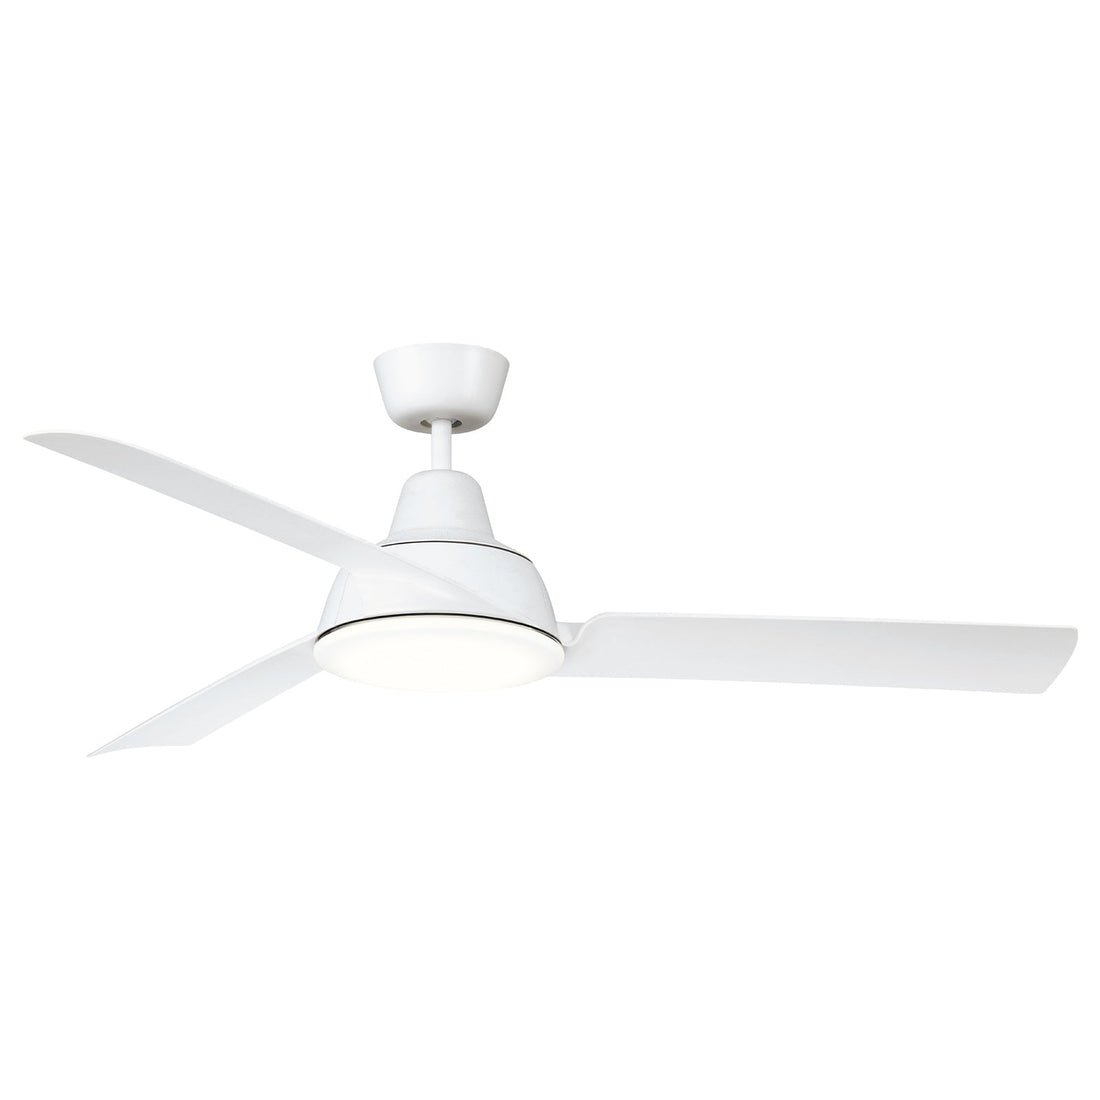 Airventure AC Ceiling Fan with LED Light Mercator